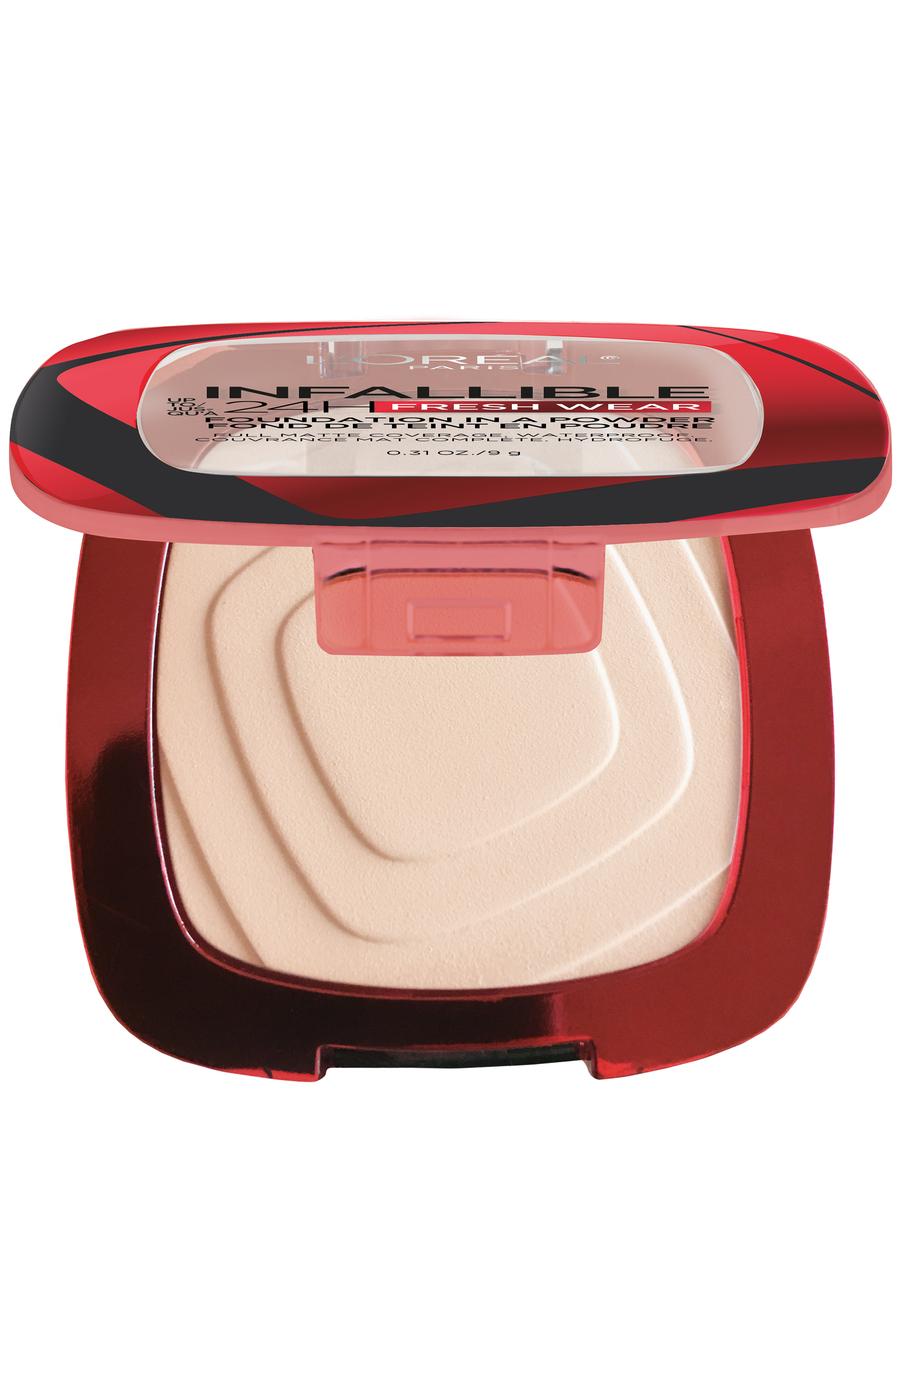 L'Oréal Paris Infallible Up to 24H Fresh Wear Foundation in a Powder Pearl; image 2 of 4